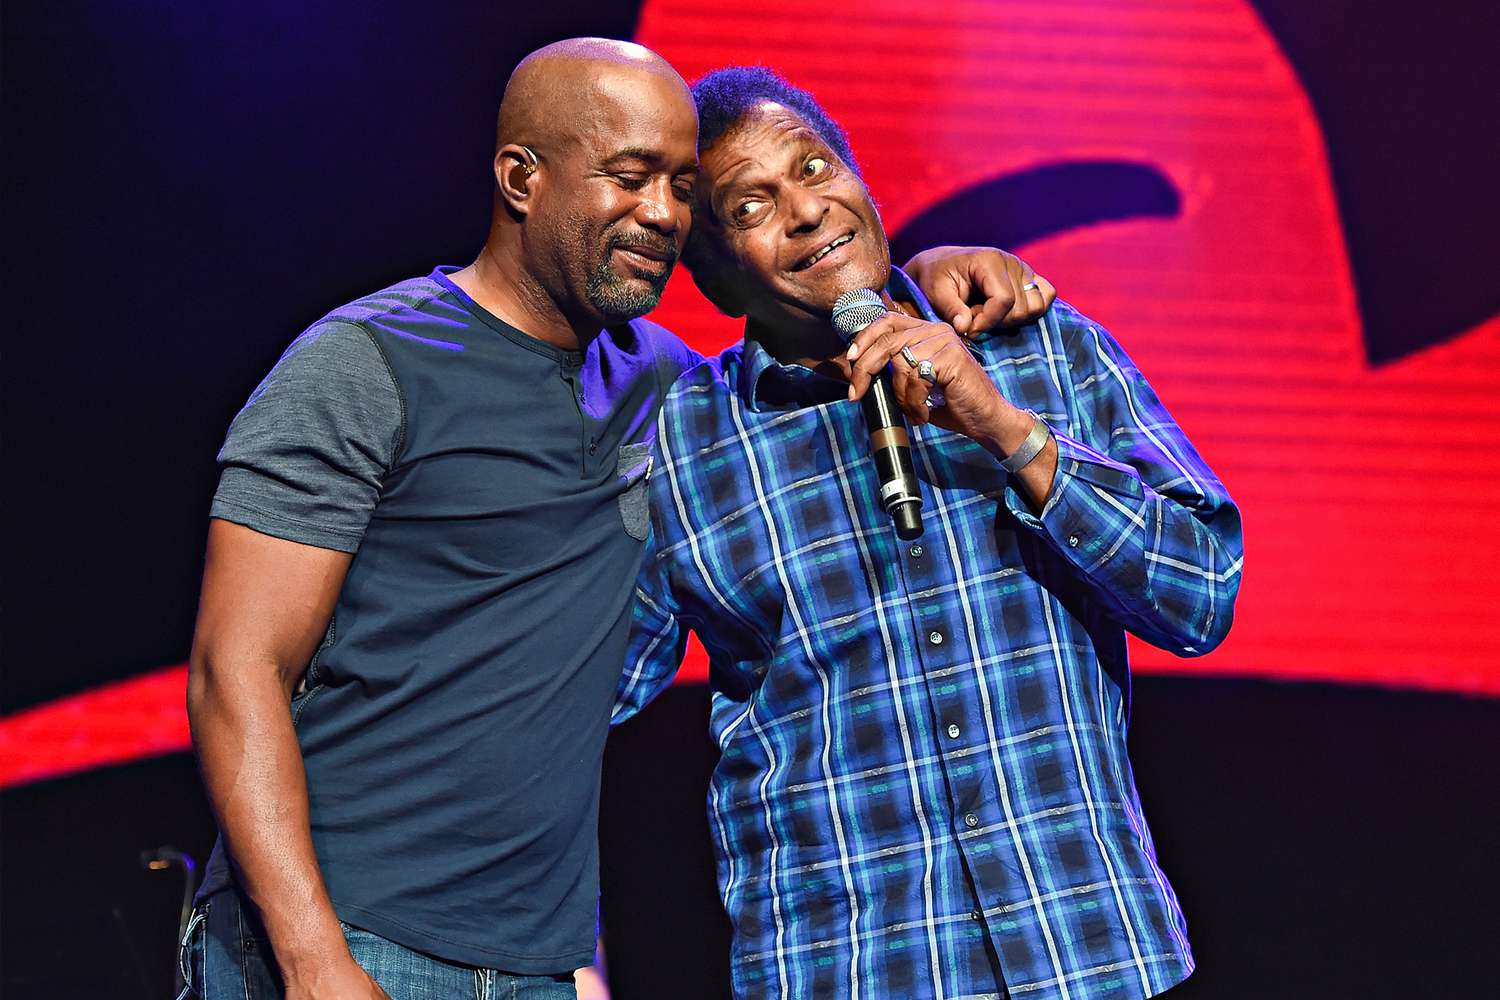 legends who paved the way - darius rucker and charley pride